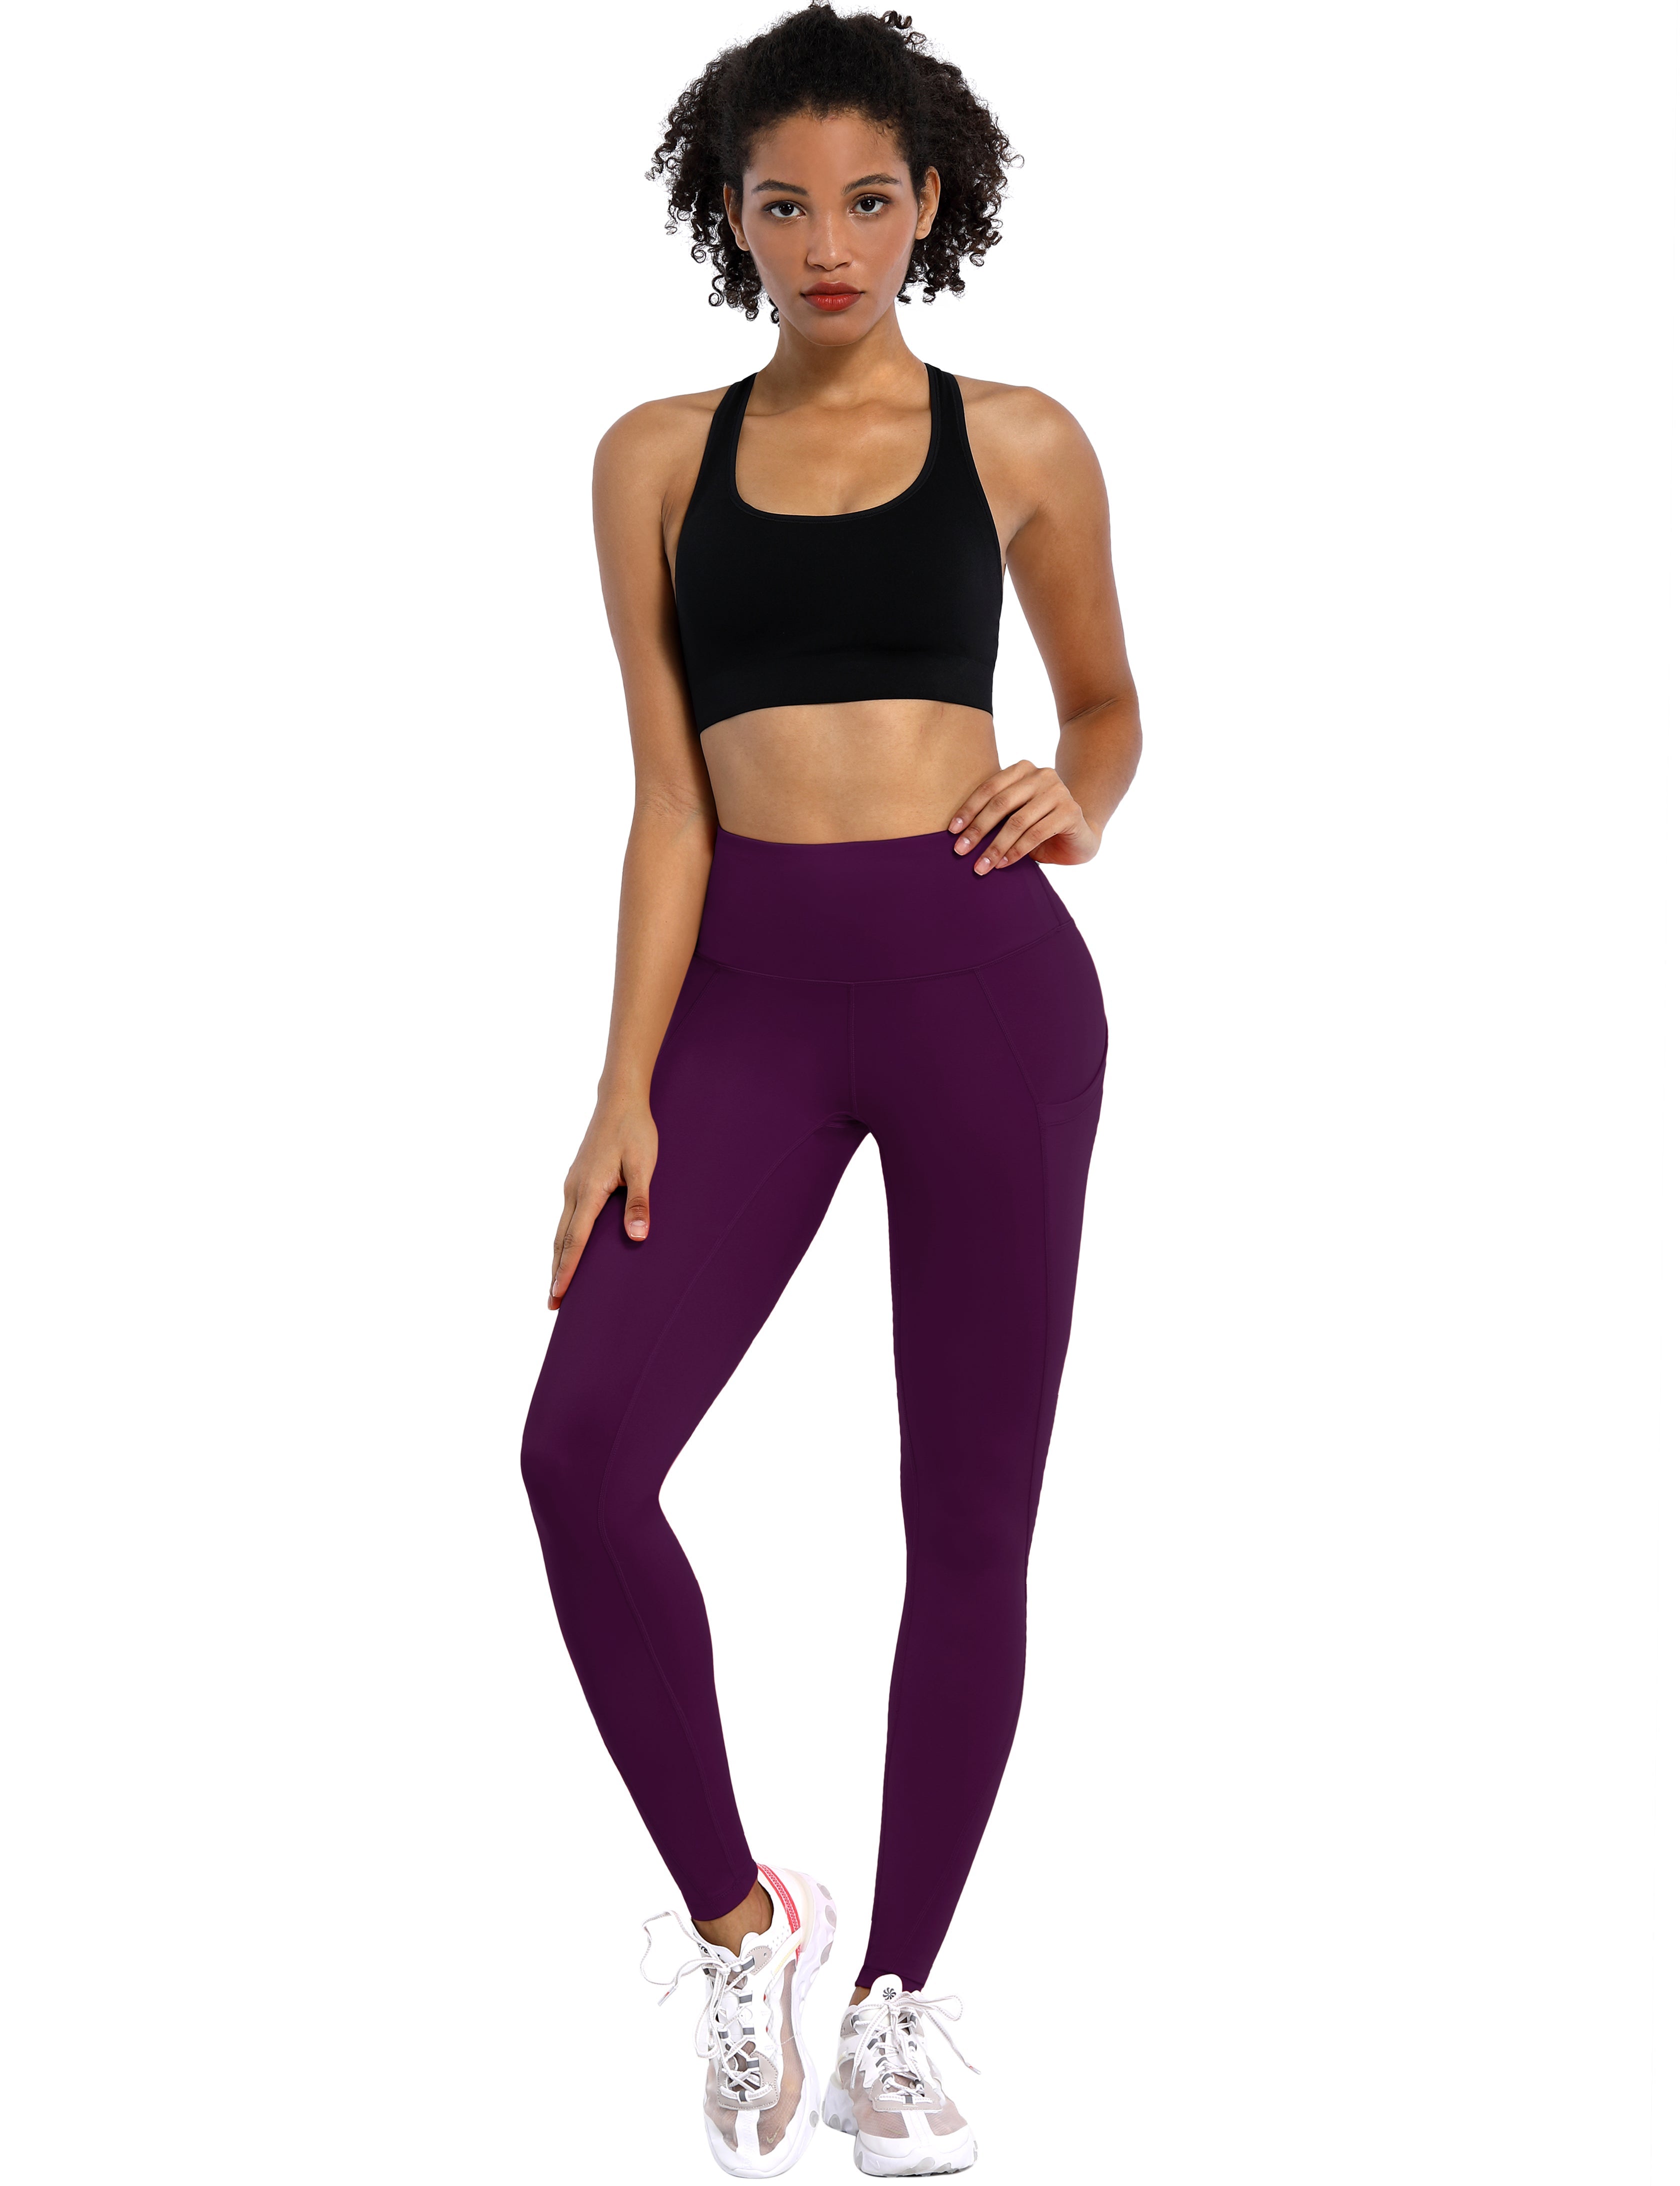 High Waist Side Pockets Pilates Pants plum 75% Nylon, 25% Spandex Fabric doesn't attract lint easily 4-way stretch No see-through Moisture-wicking Tummy control Inner pocket